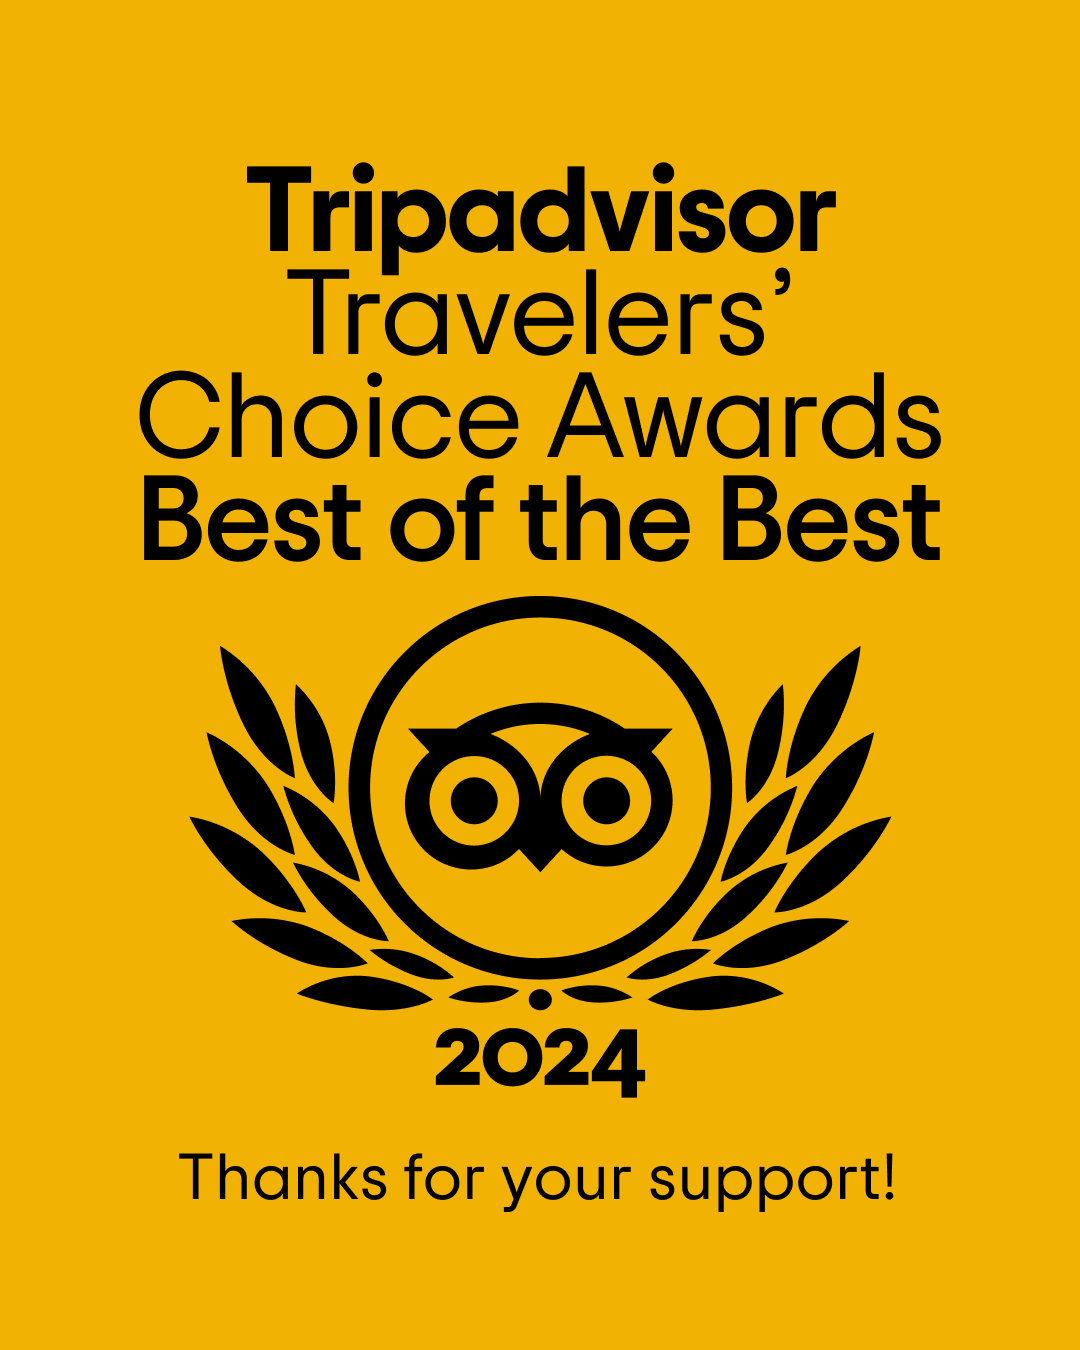 Travelers choice is a travelers choice award for 2023.